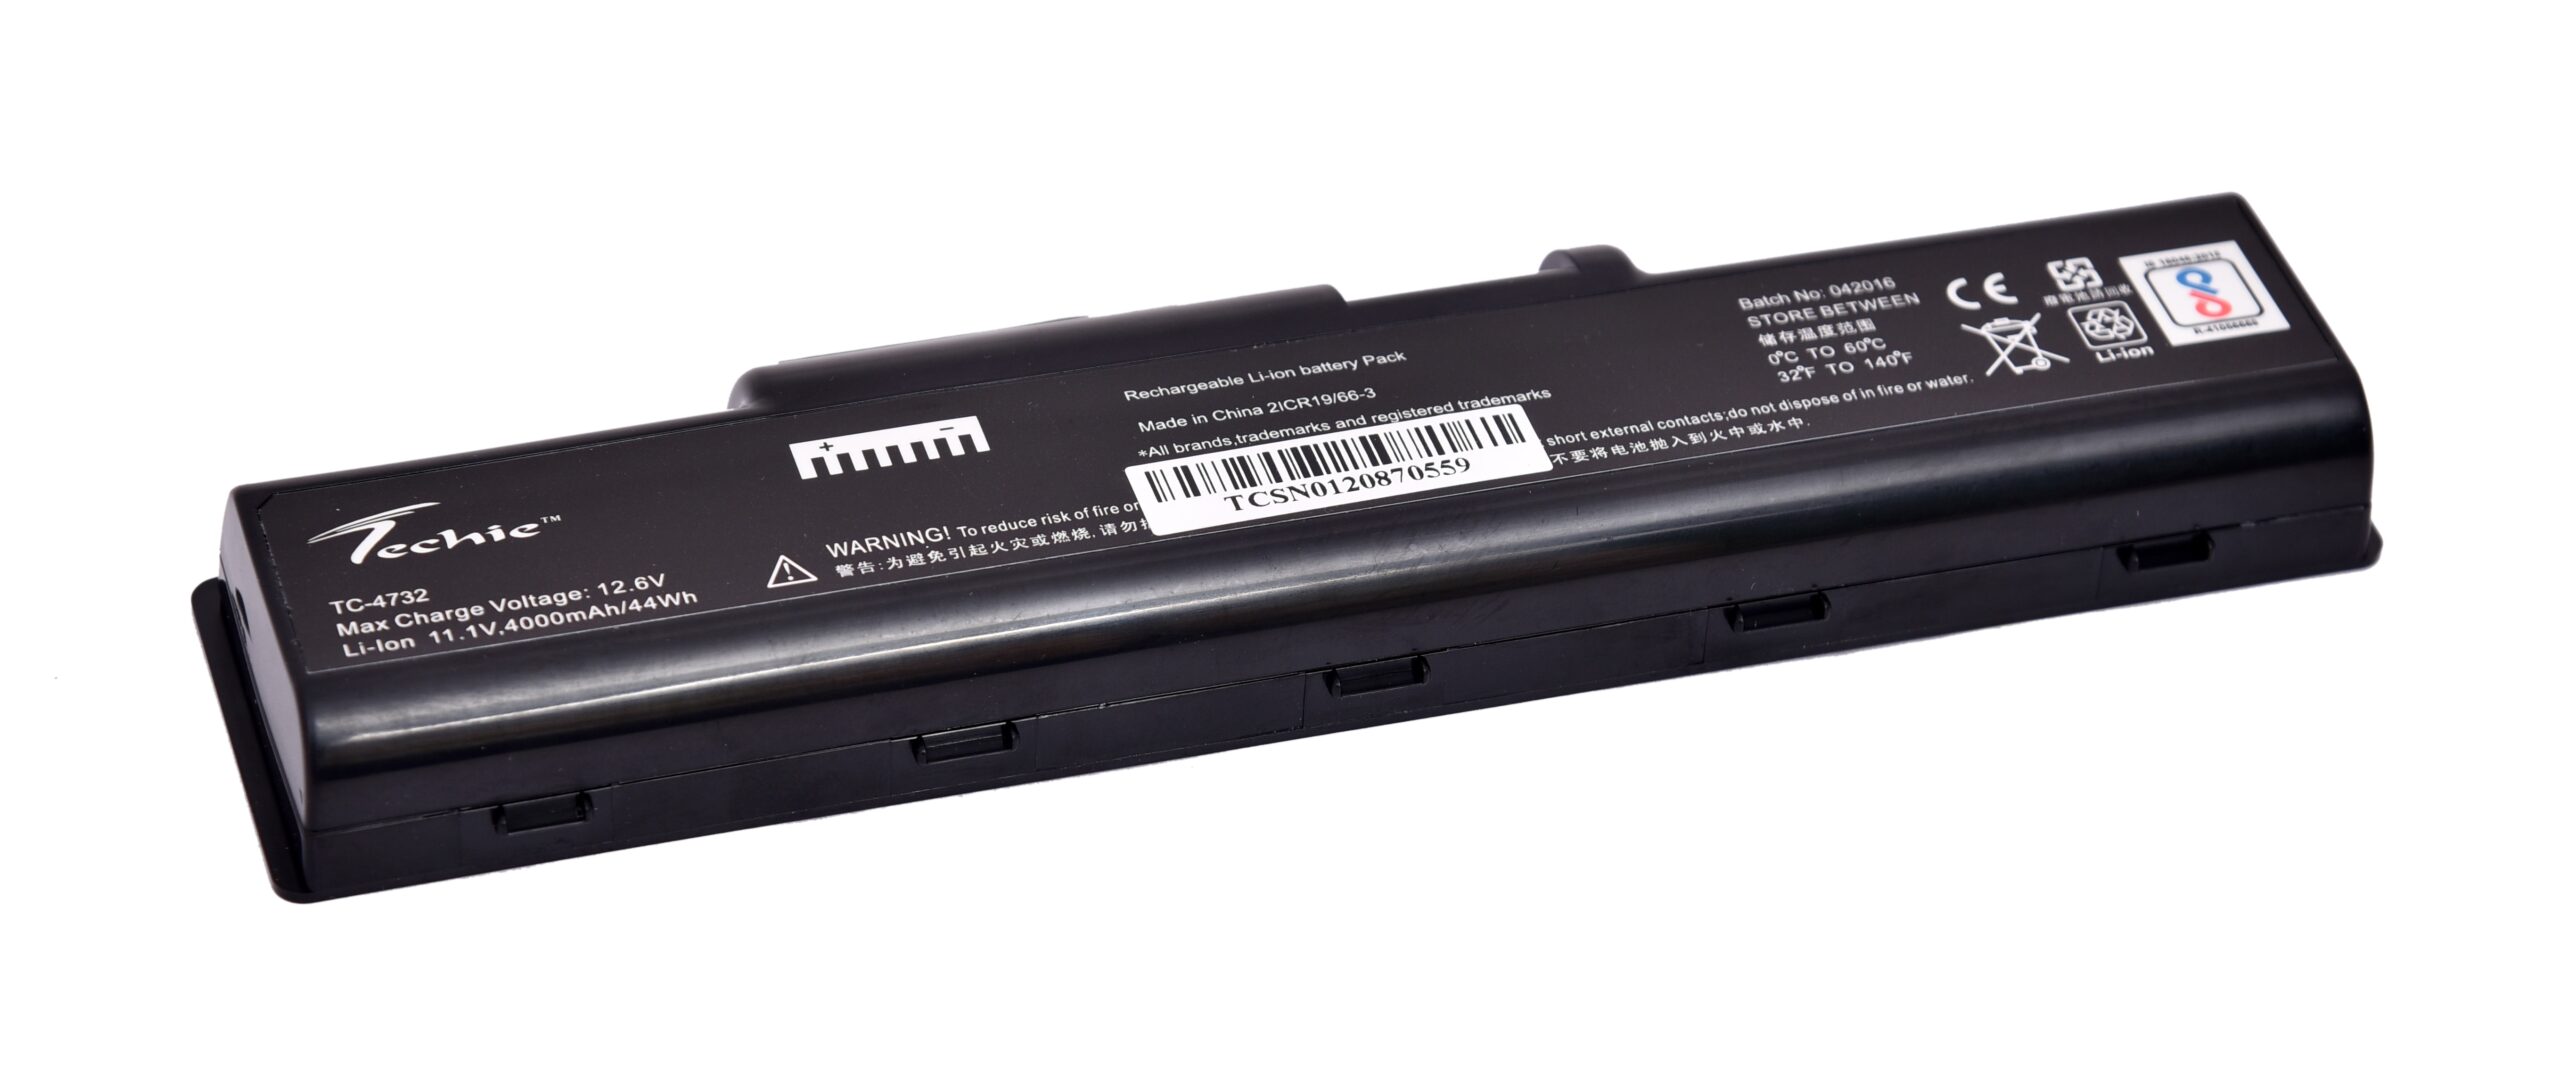 Techie Compatible Battery for Acer 4732 - Aspire 4732Z, 4732Z-452G32Mnbs, 5532, 5732Z, Aspire 5734Z Series Laptops (4000mAh, 6-Cell)